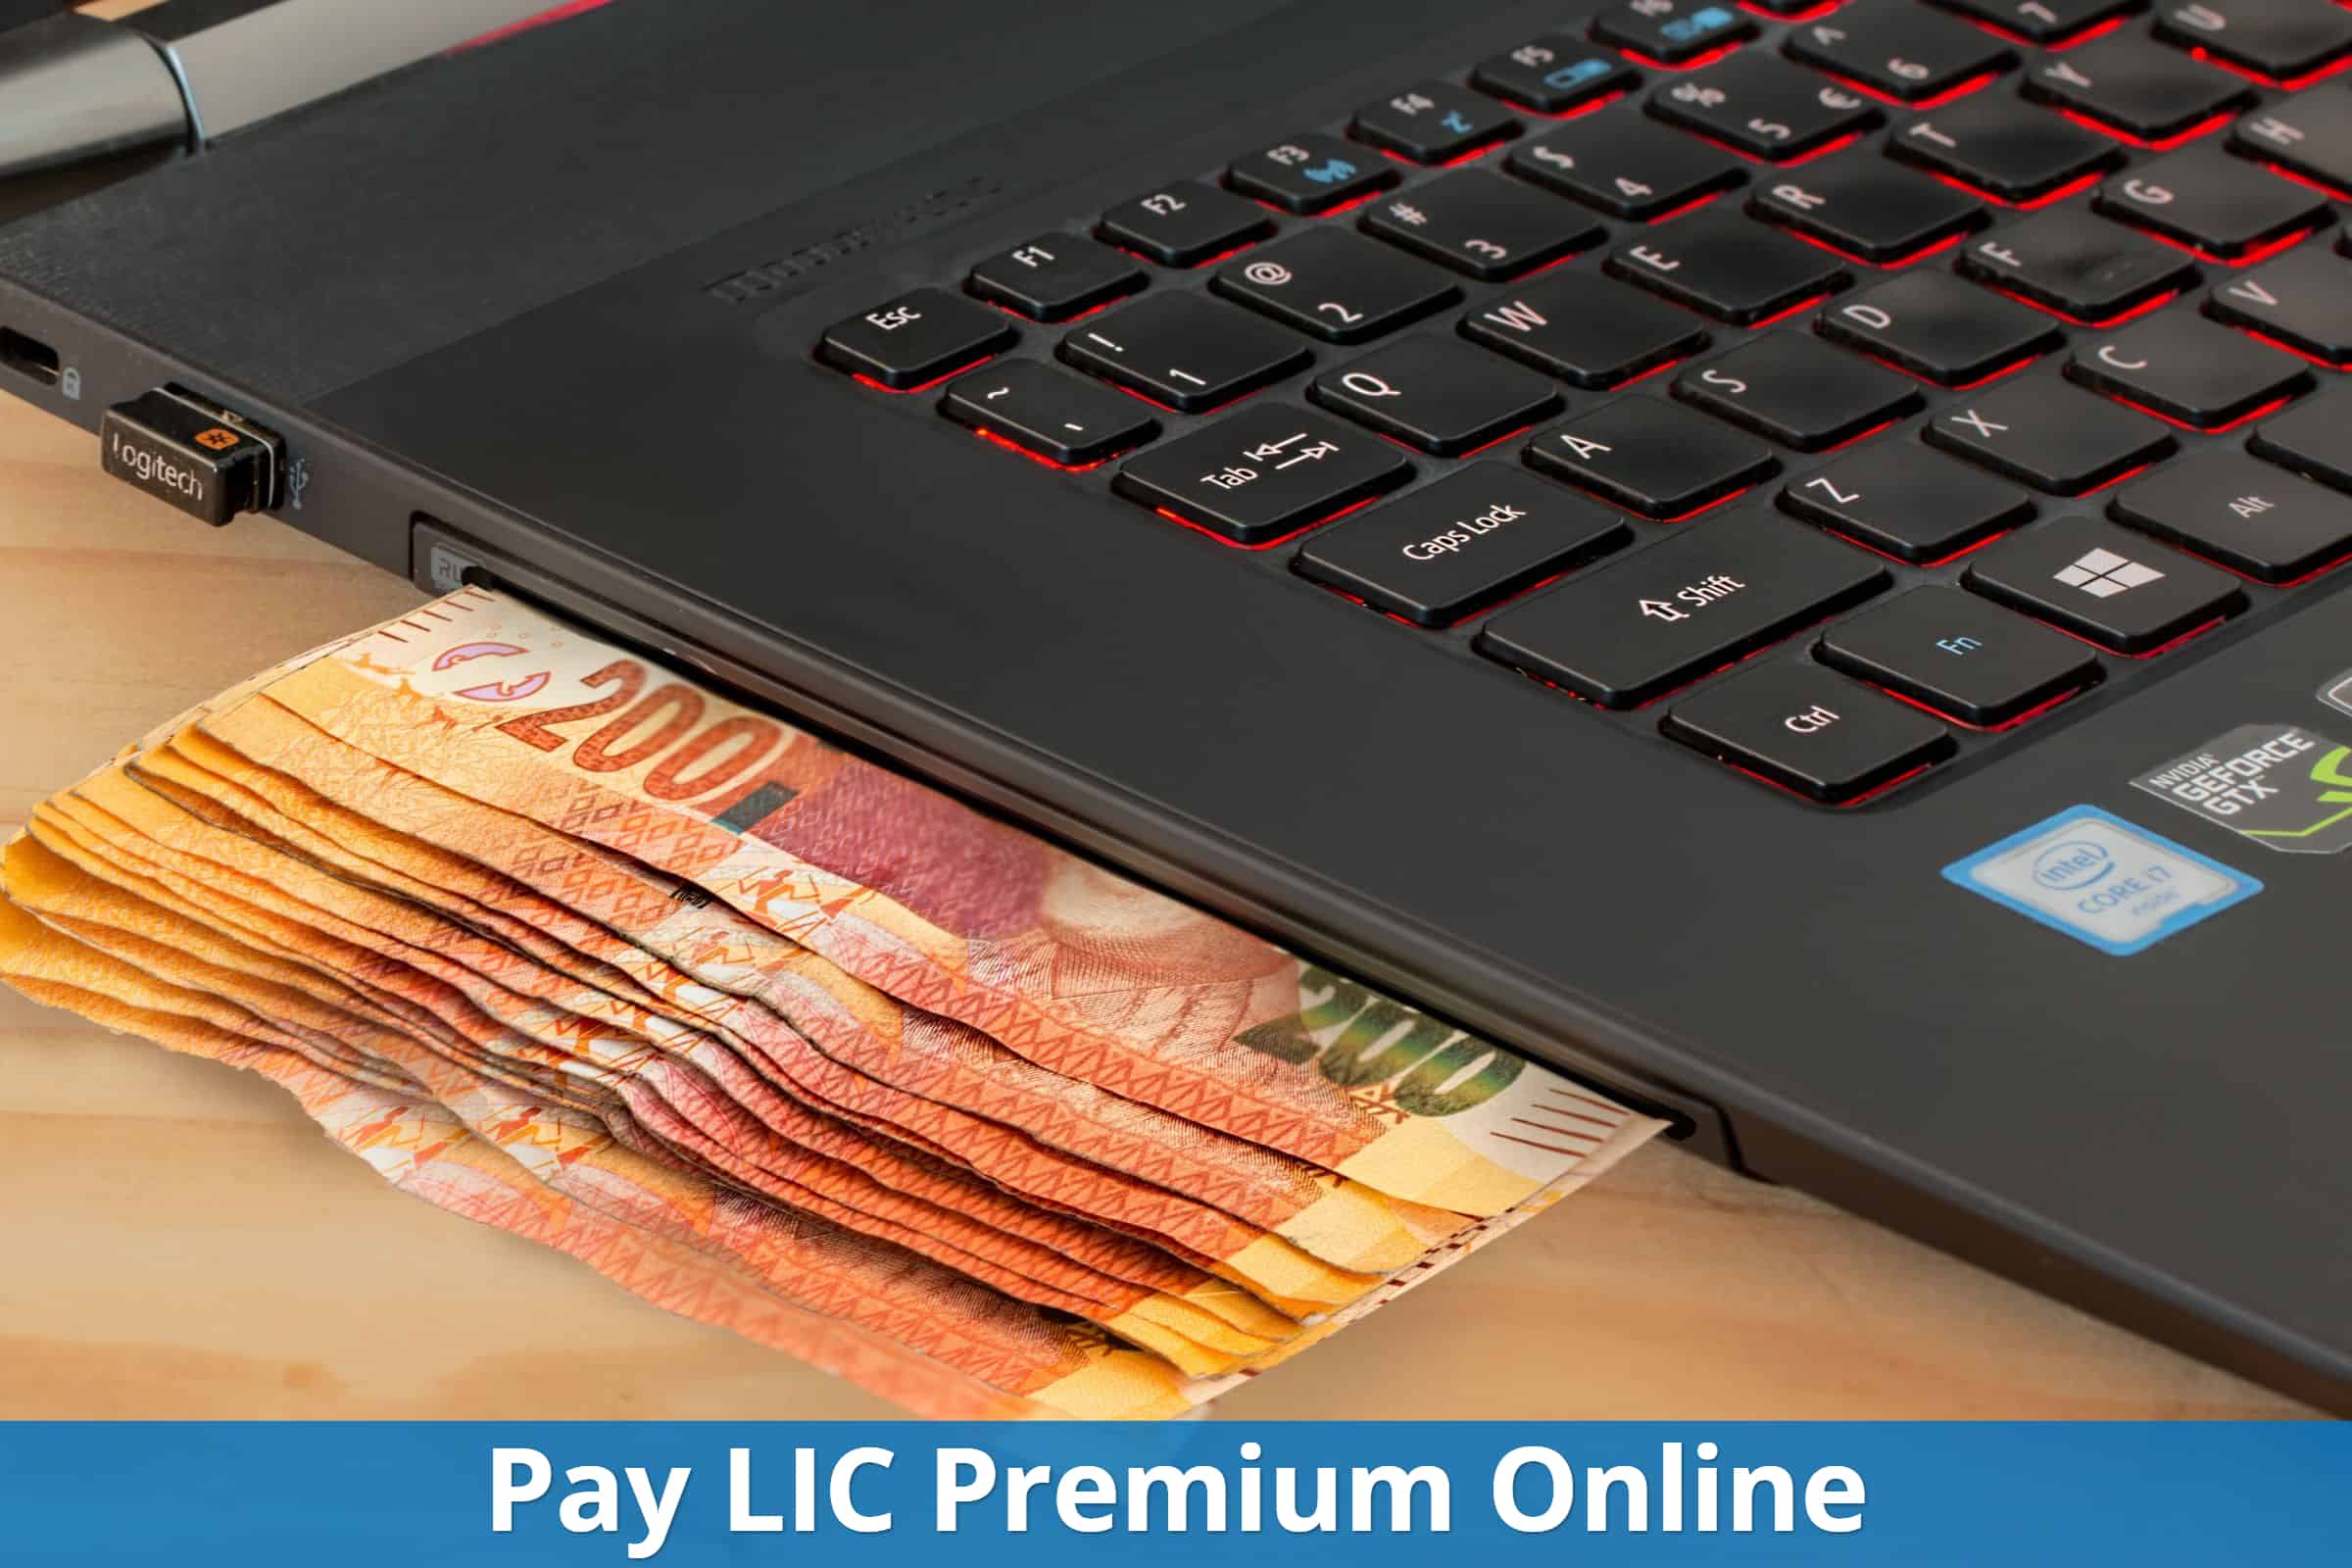 How To Pay Lic Premium Online In Less Than 15 Mins 3 Options 2018